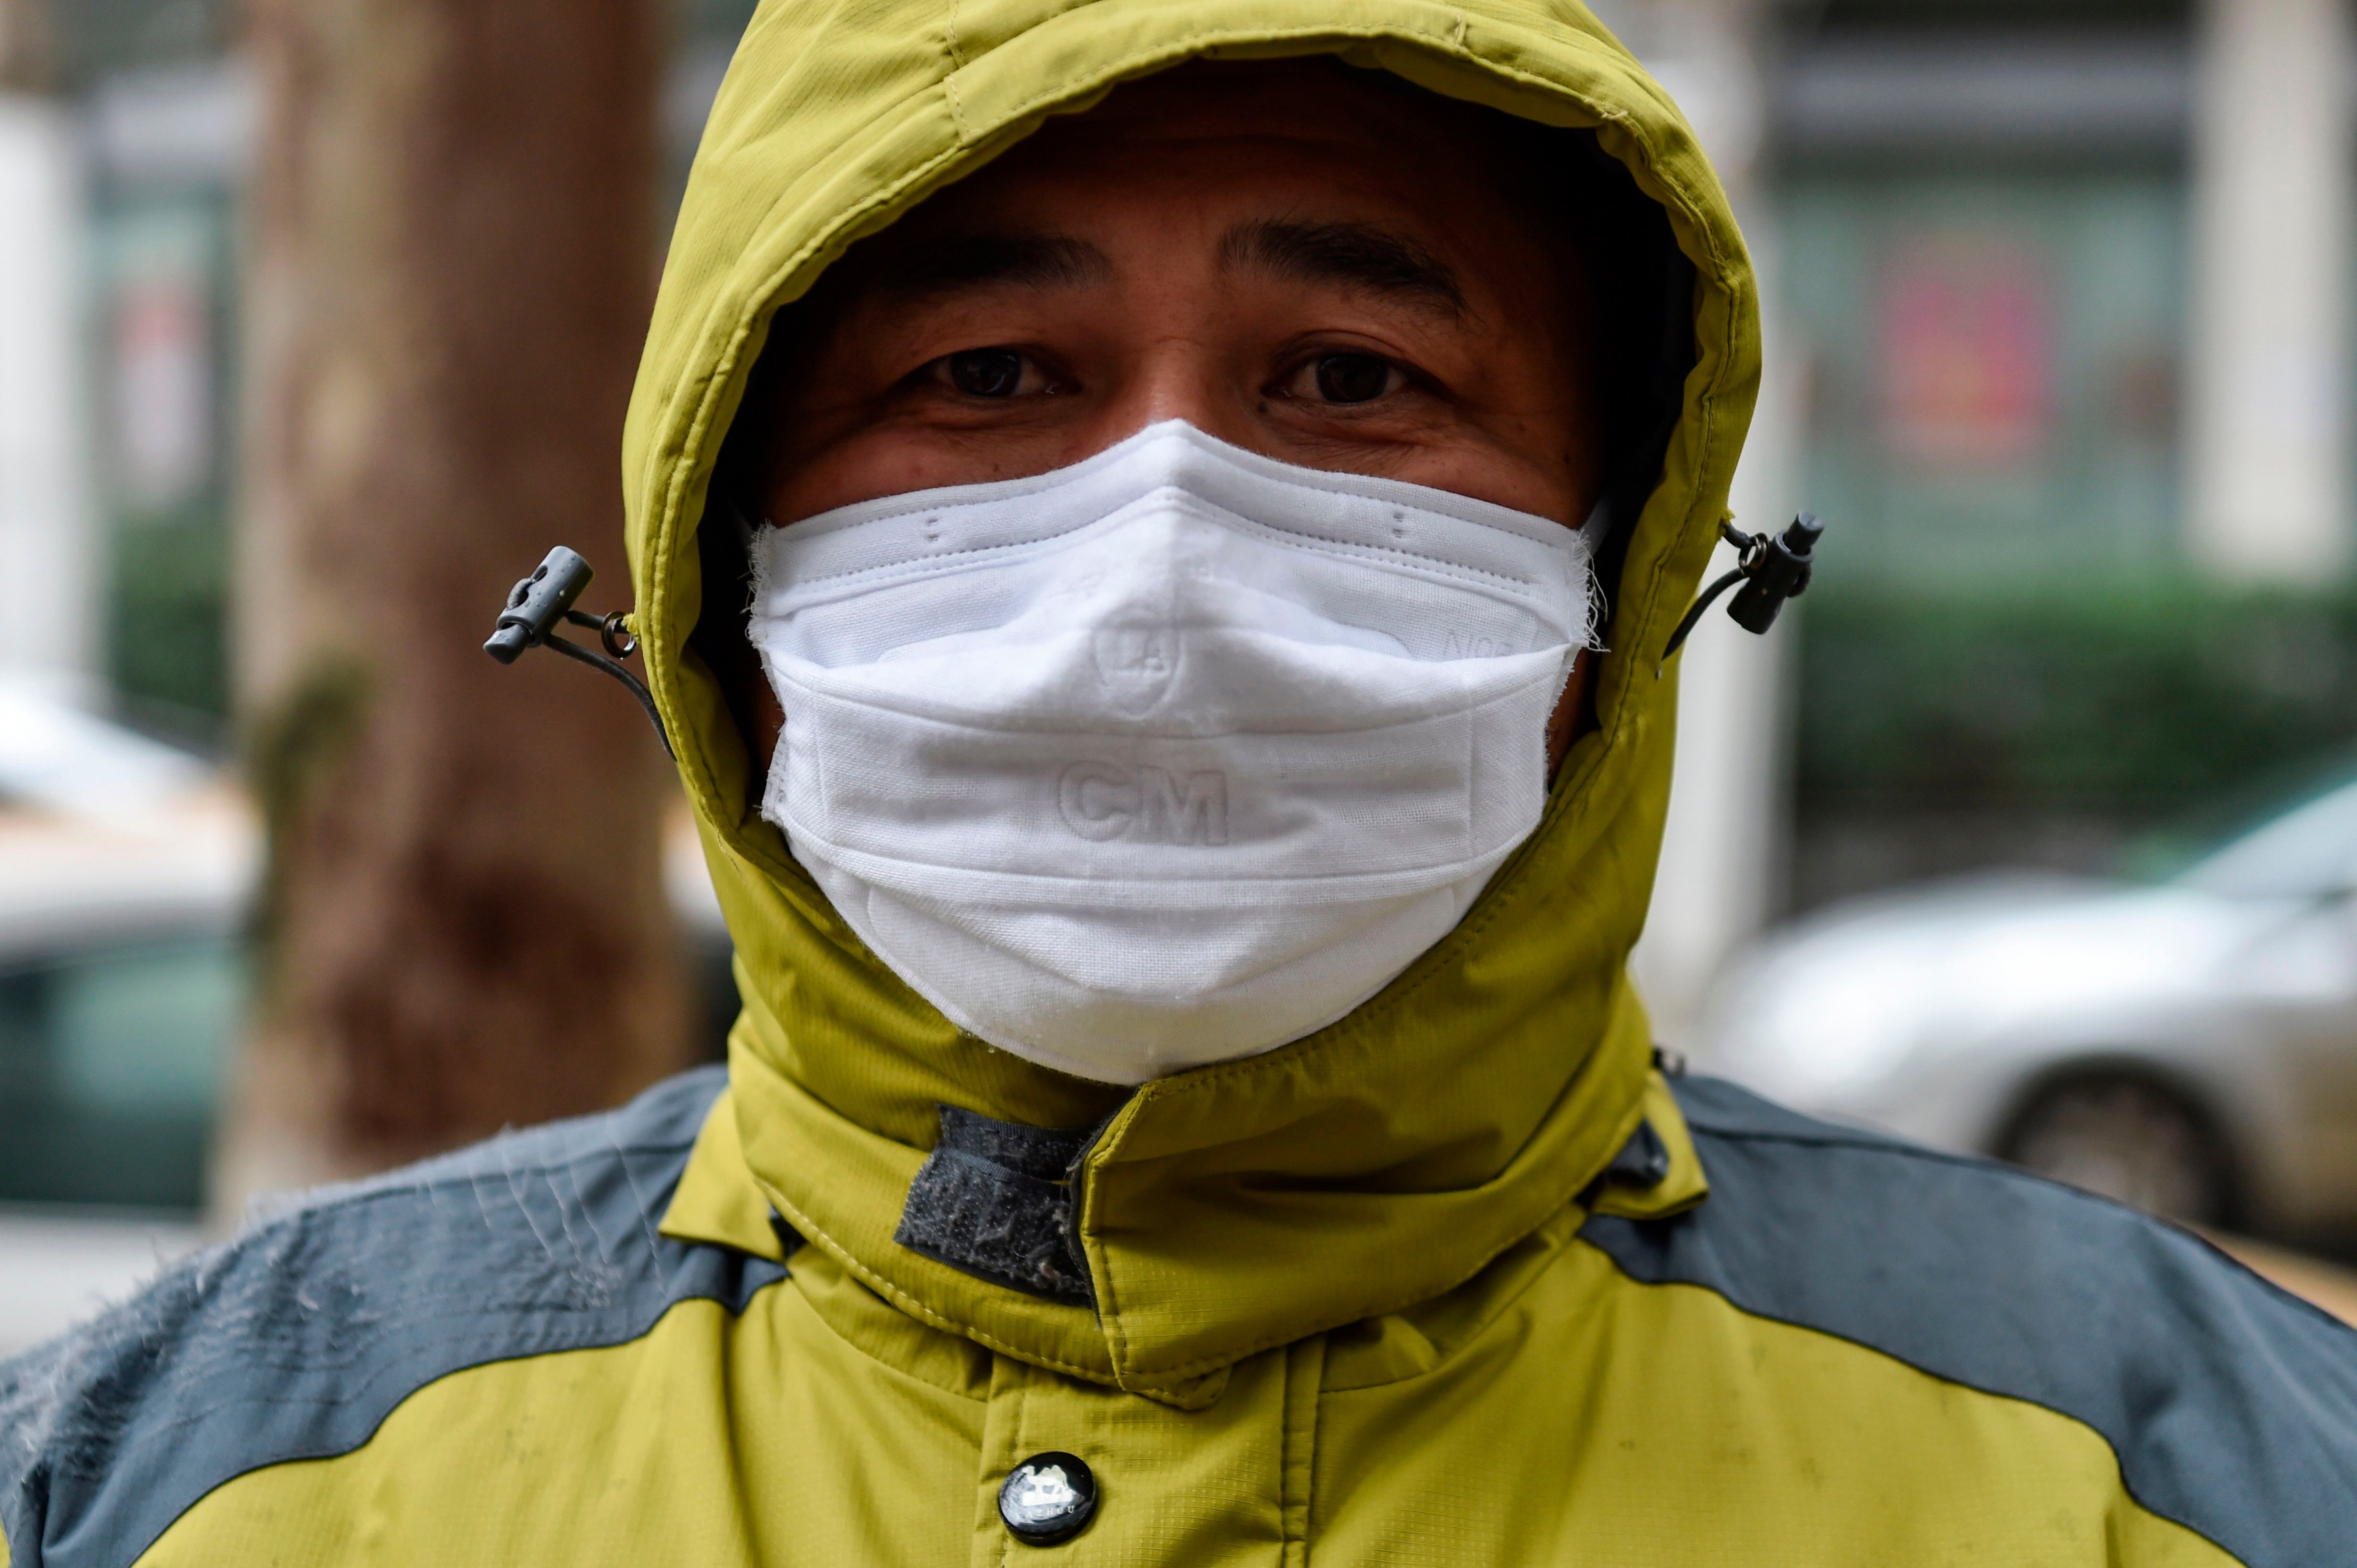 A man who works as a volunteer taking medicine for those who need it waits outside a pharmacy in Wuhan on January 26, 2020, the Chinese city at the epicenter of the coronavirus outbreak (HECTOR RETAMAL/AFP via Getty Images)